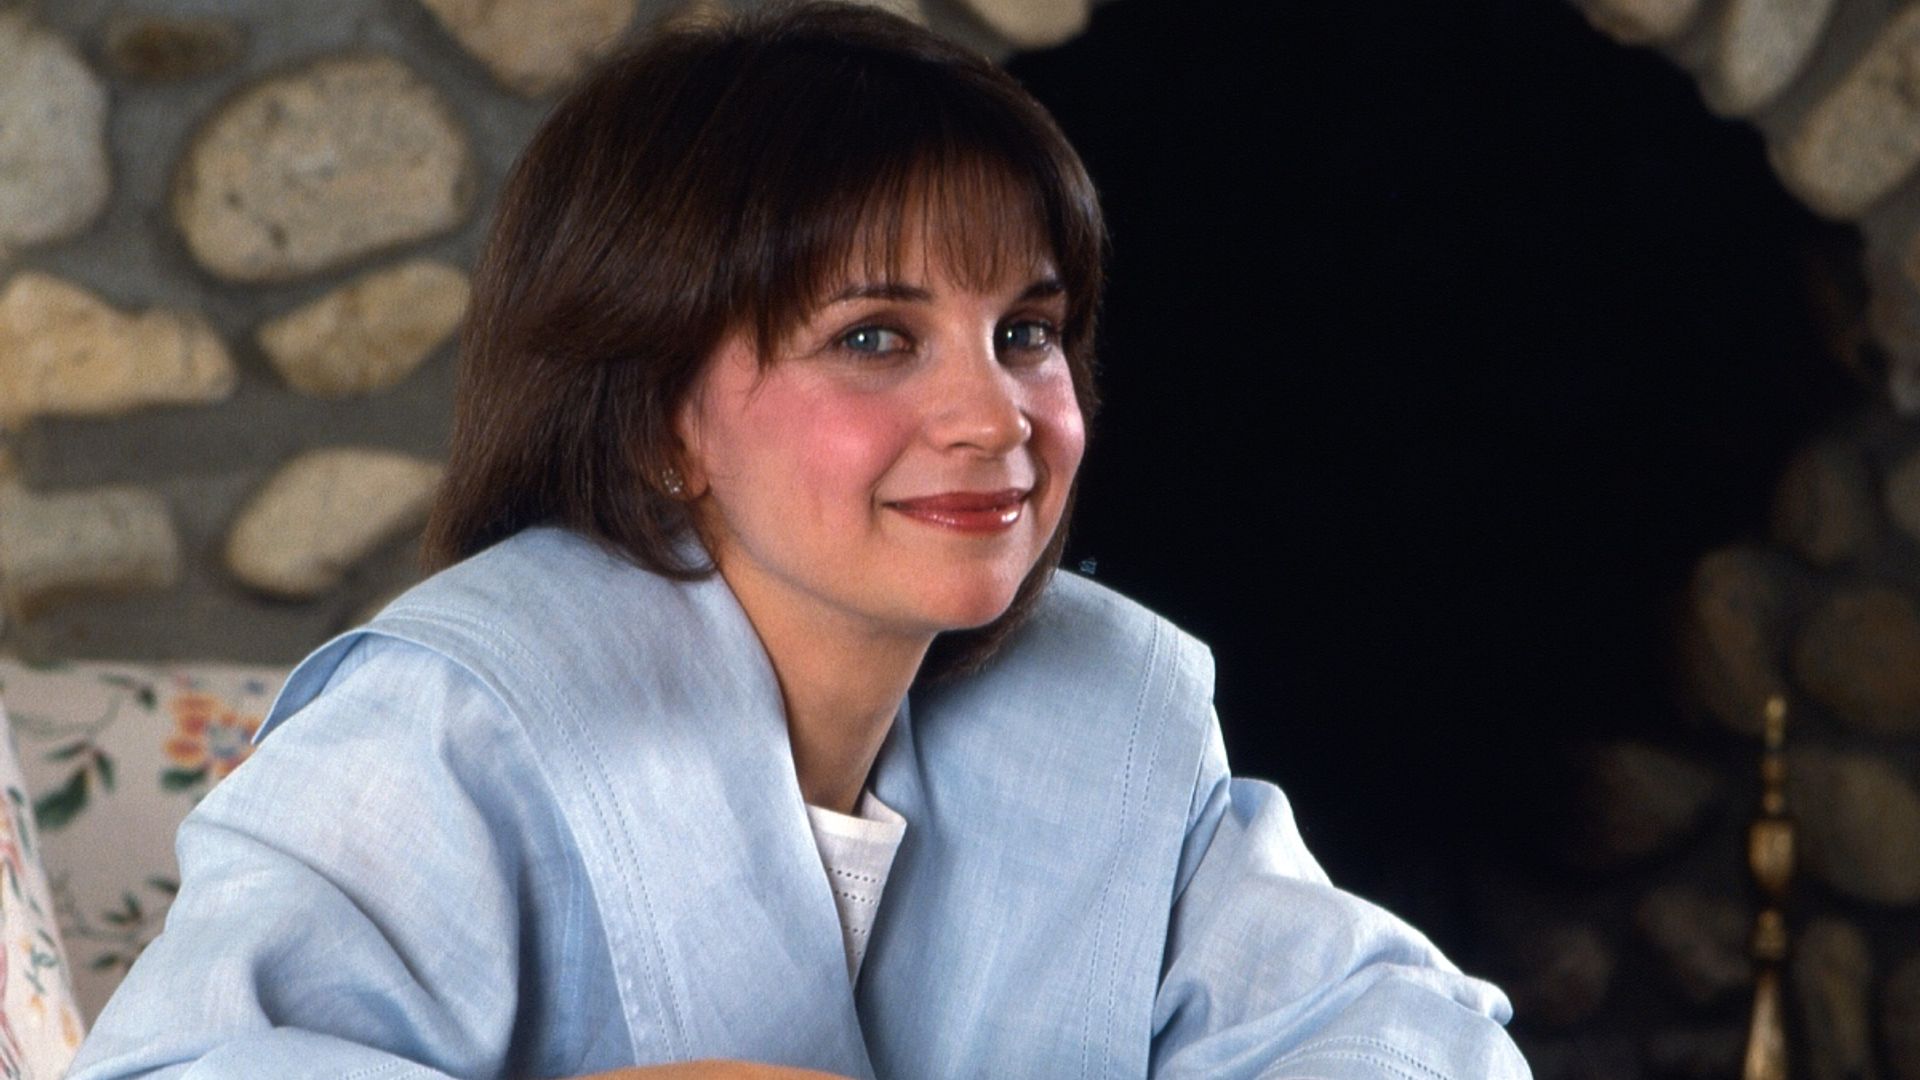 Laverne & Shirley and Happy Days star Cindy Williams dies aged 75